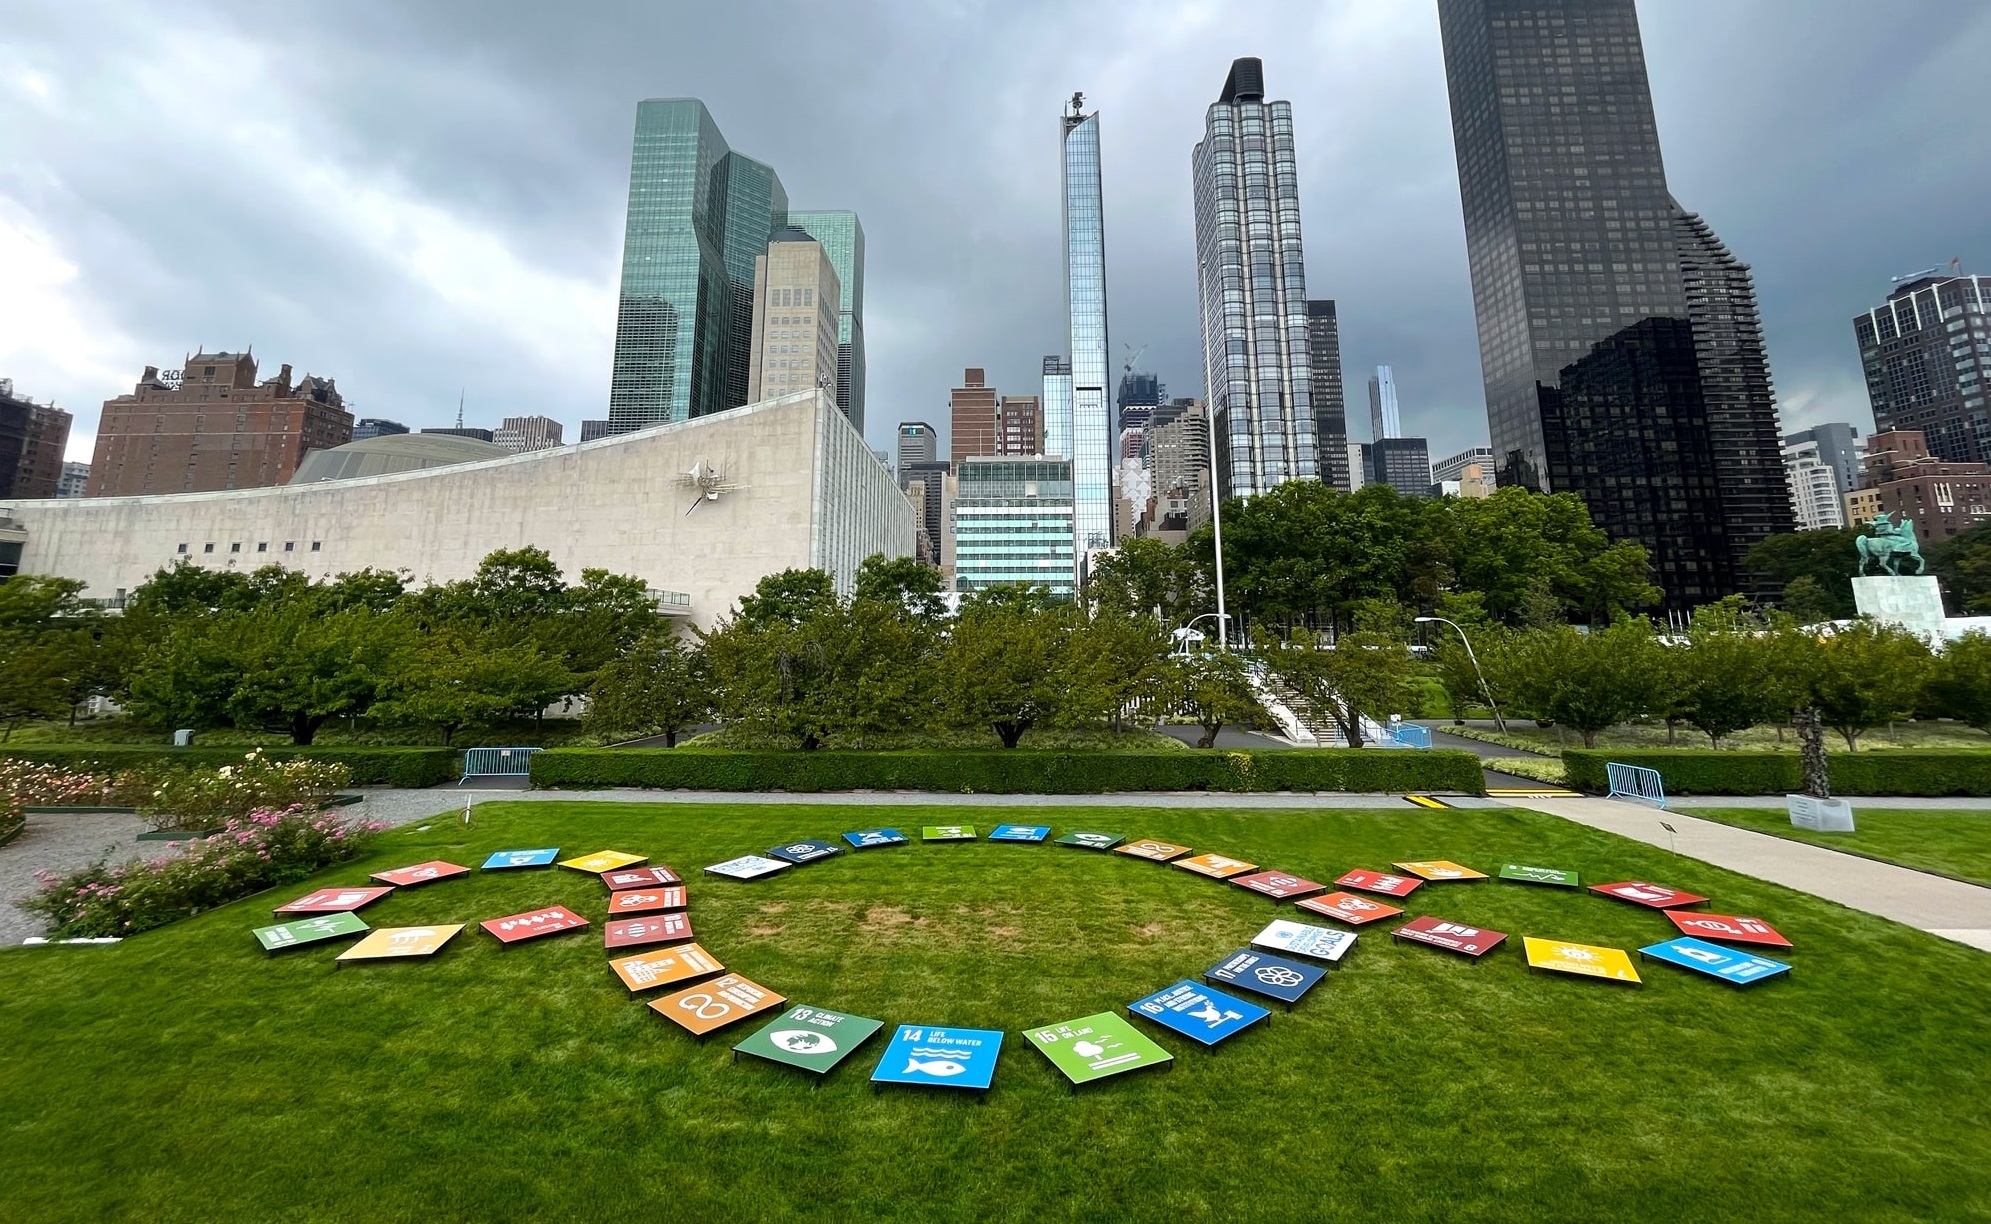 The Third Paradise by Michelangelo Pistoletto at the United Nations in New  York - Journal Cittadellarte